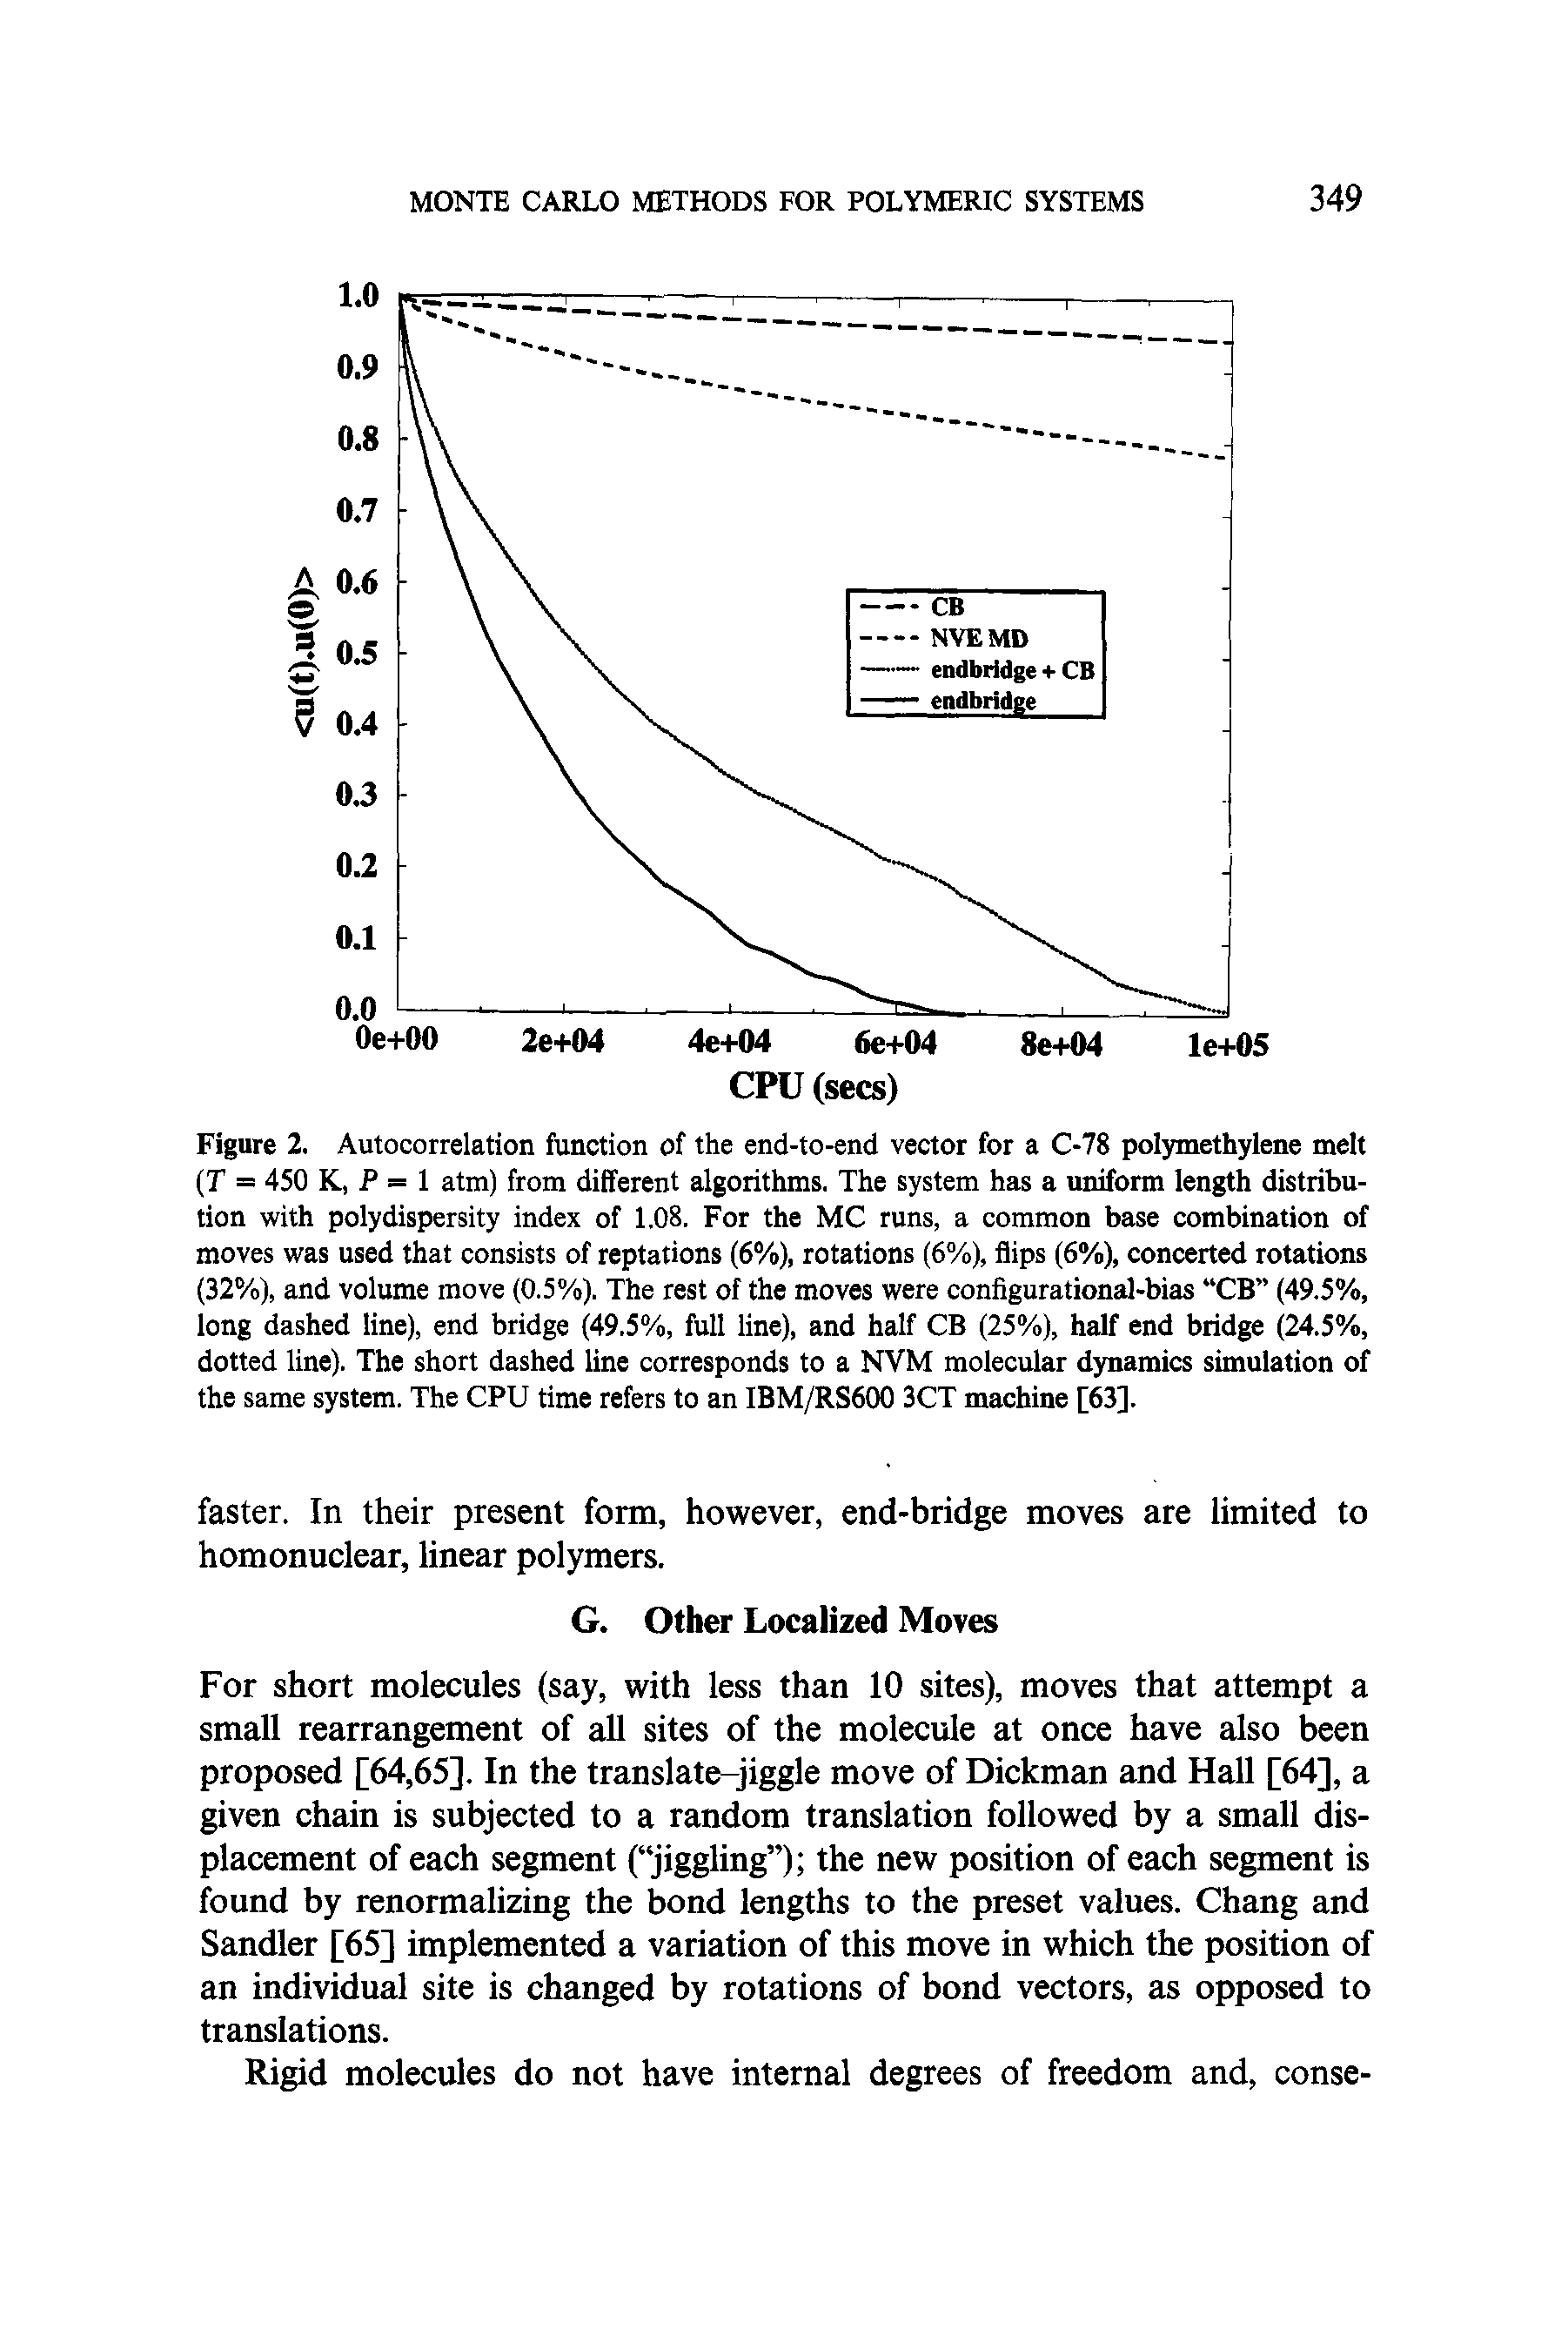 Figure 2. Autocorrelation function of the end-to-end vector for a C-78 polymethylene melt (T = 450 , P = 1 atm) from different algorithms. The system has a uniform length distribution with polydispersity index of 1.08. For the MC runs, a common base combination of moves was used that consists of reptations (6%), rotations (6%), flips (6%), concerted rotations (32%), and volume move (0.5%). The rest of the moves were configurational-bias CB (49.5%, long dashed line), end bridge (49.5%, full line), and half CB (25%), half end bridge (24.5%, dotted line). The short dashed line corresponds to a NVM molecular dynamics simulation of the same system. The CPU time refers to an IBM/RS600 3CT machine [63].